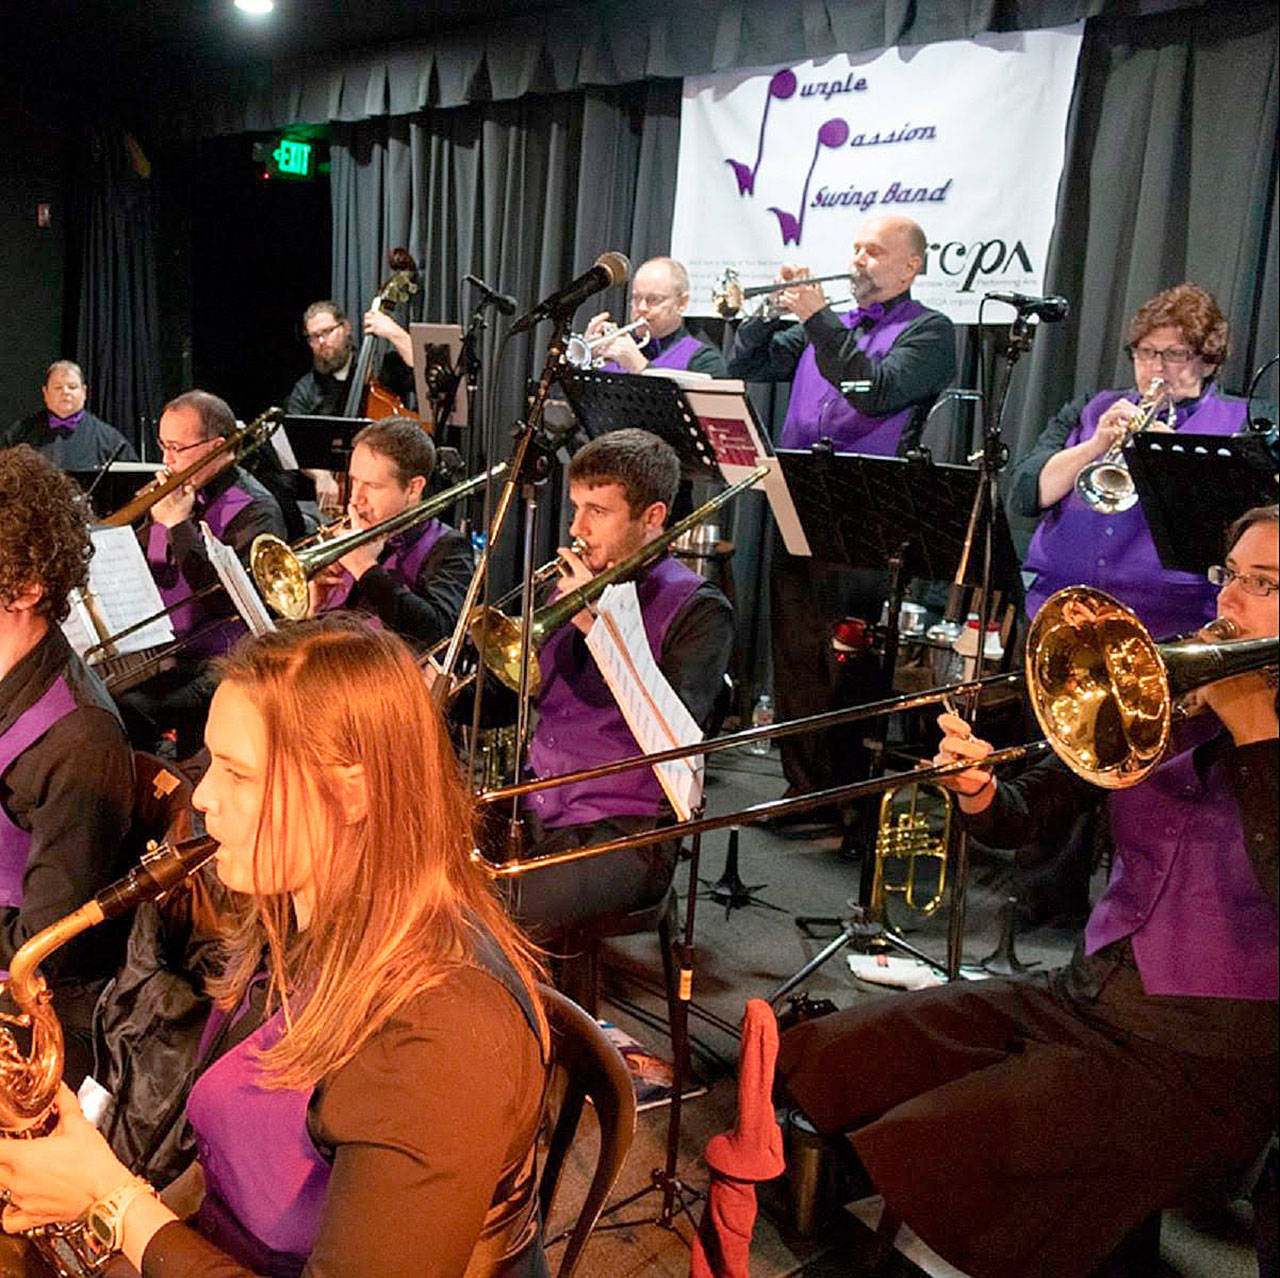 NYFS will have the Purple Passion Swing Band perform at the upcoming Northshore’s Night Out: Sip, Swing and Support fundraiser. Courtesy photo